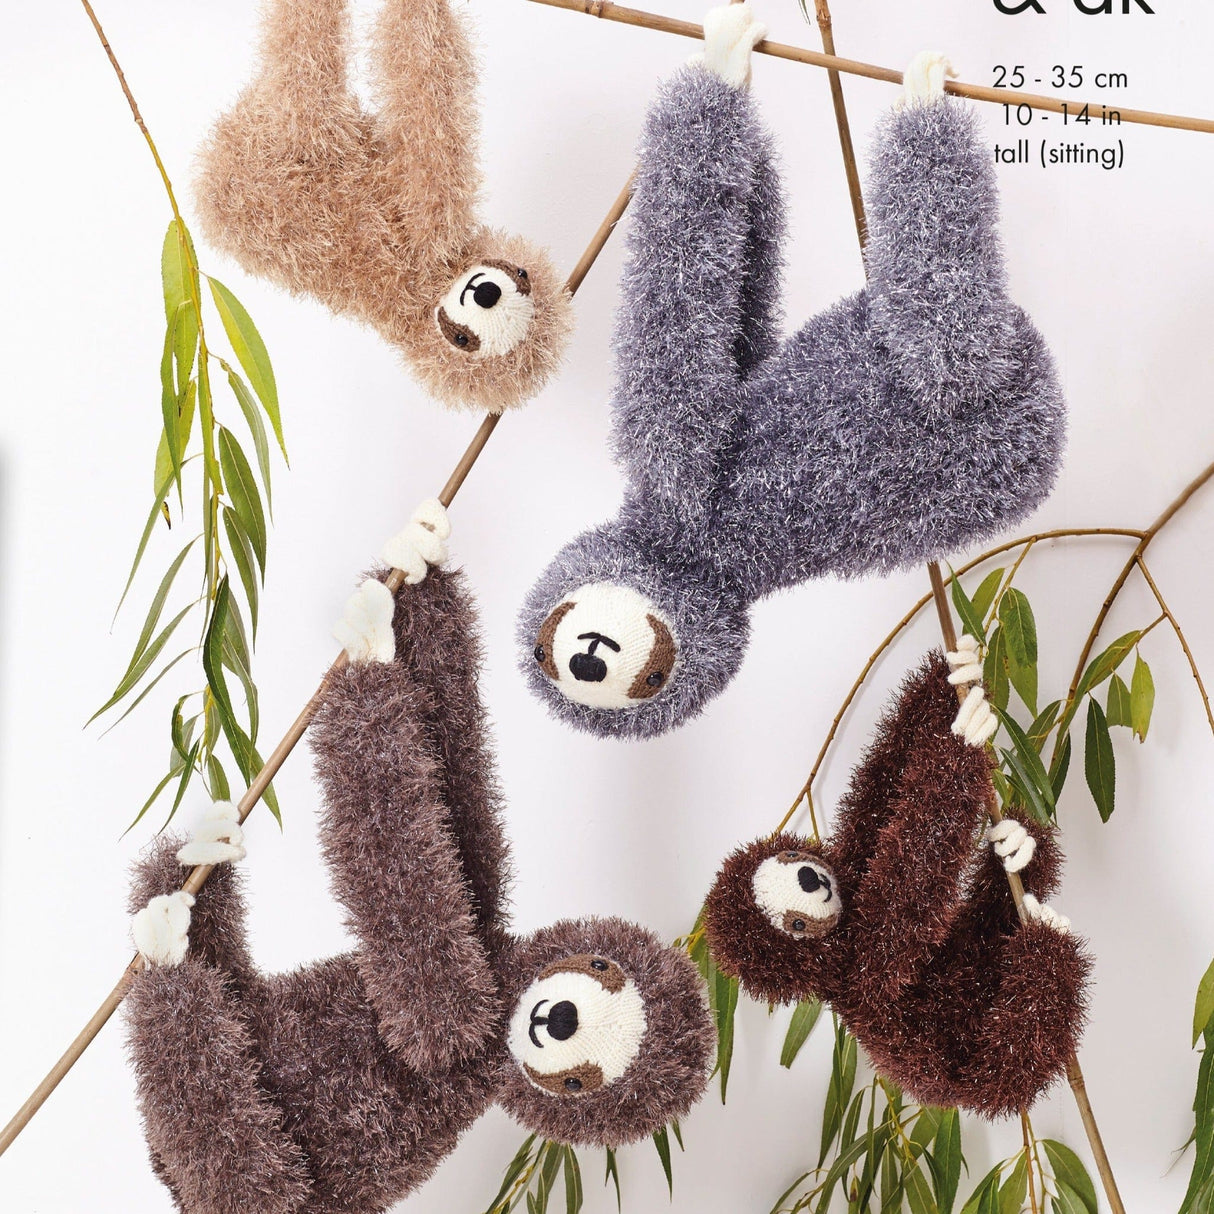 King Cole Patterns King Cole Toy Sloth Knitting Pattern 9138